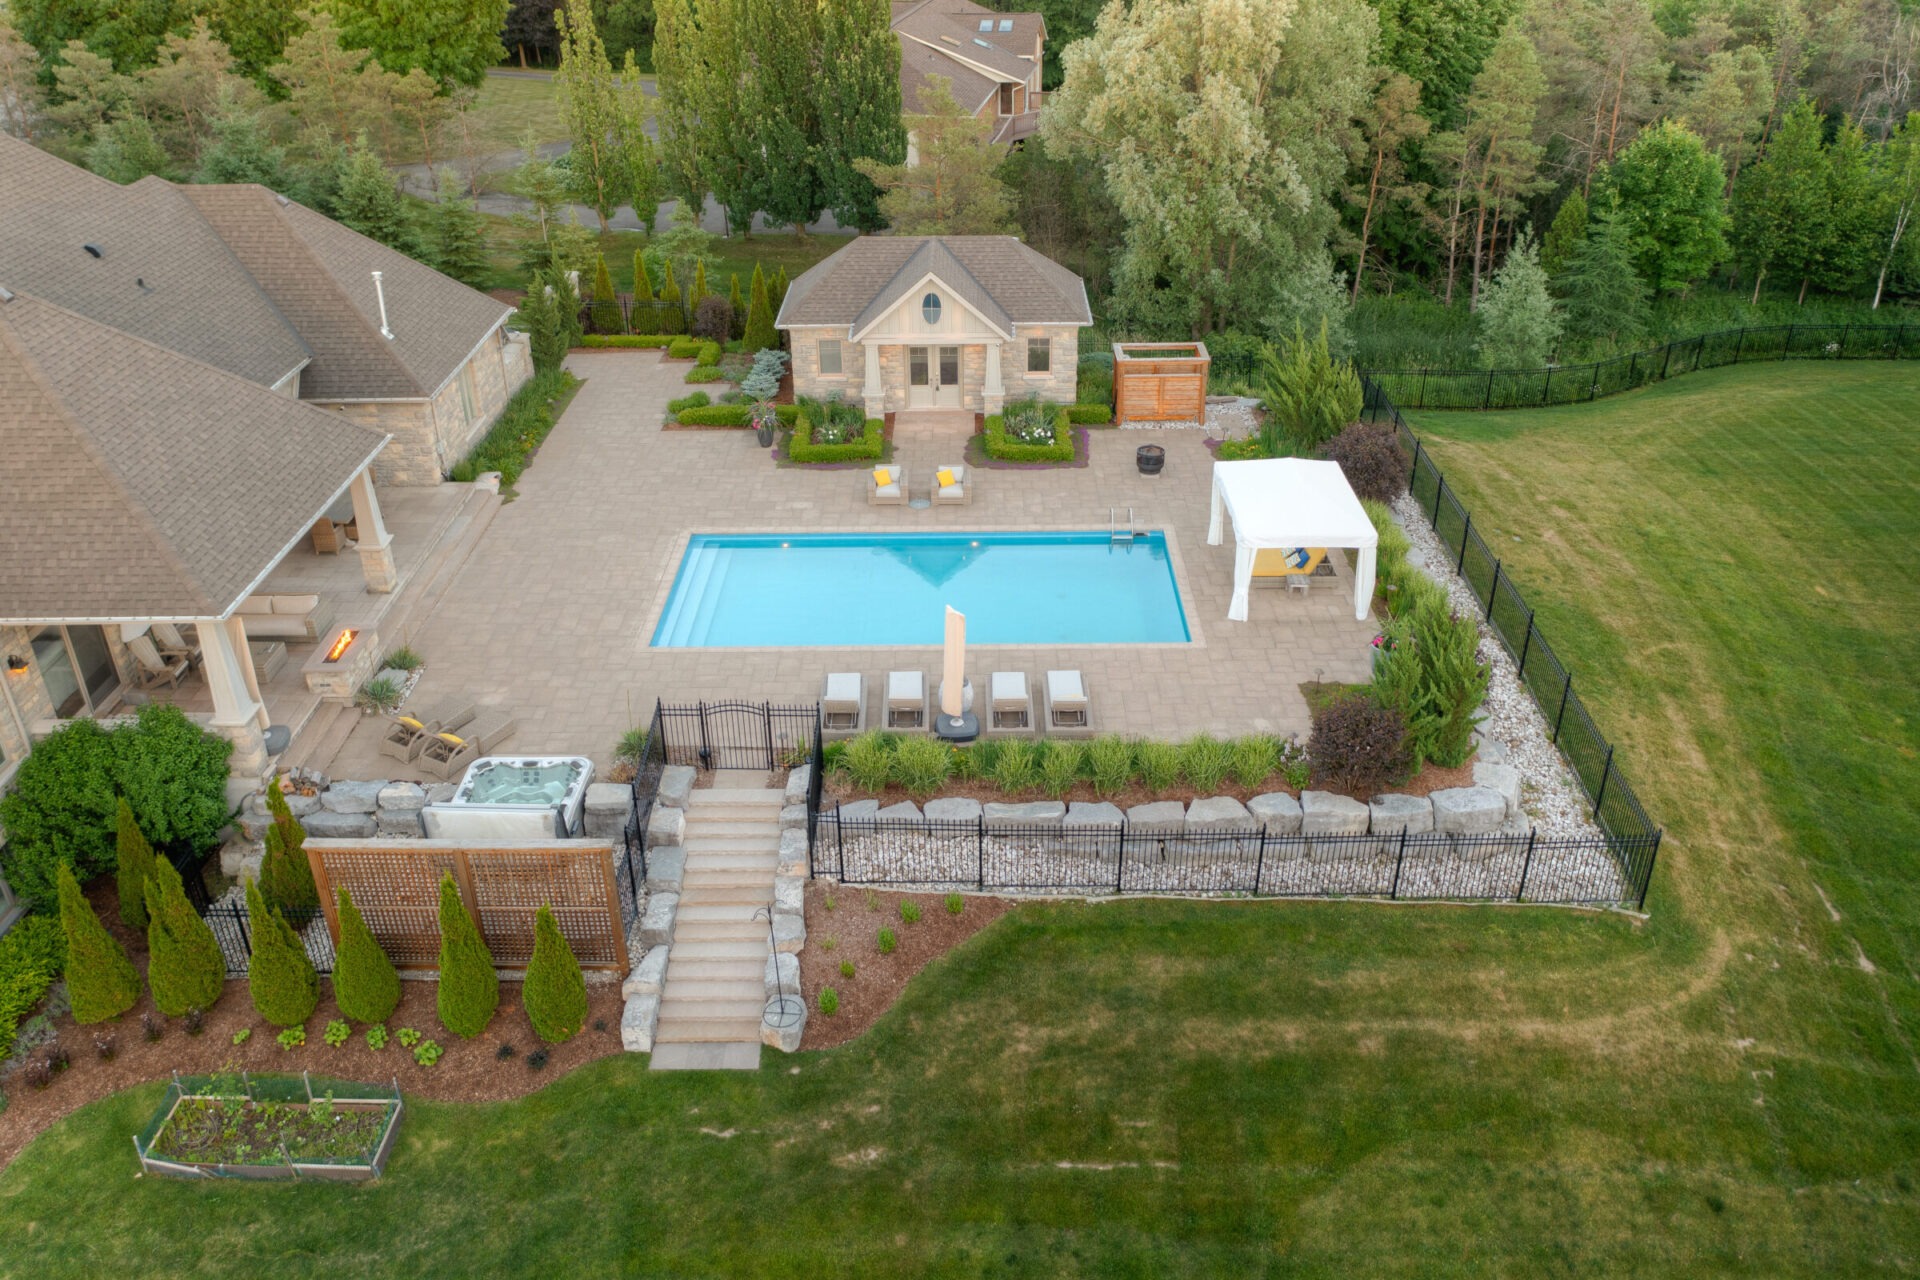 Aerial view of a luxurious backyard with a large pool, hot tub, manicured lawn, patio area, and a pool house surrounded by trees and shrubbery.